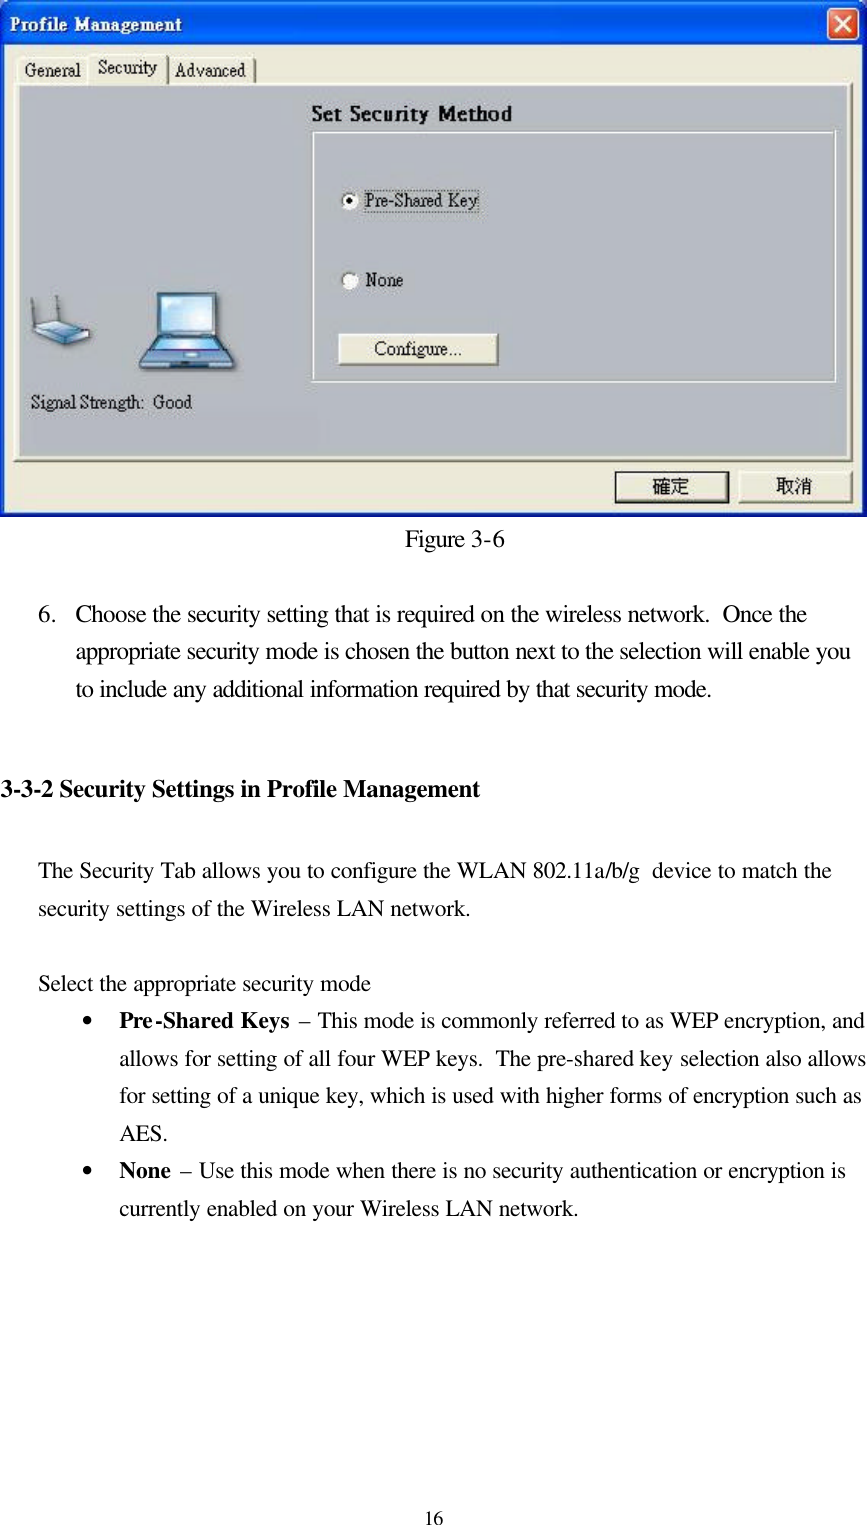  16Figure 3-6  6.  Choose the security setting that is required on the wireless network.  Once the appropriate security mode is chosen the button next to the selection will enable you to include any additional information required by that security mode.   3-3-2 Security Settings in Profile Management  The Security Tab allows you to configure the WLAN 802.11a/b/g  device to match the security settings of the Wireless LAN network.  Select the appropriate security mode • Pre-Shared Keys – This mode is commonly referred to as WEP encryption, and allows for setting of all four WEP keys.  The pre-shared key selection also allows for setting of a unique key, which is used with higher forms of encryption such as AES. • None – Use this mode when there is no security authentication or encryption is currently enabled on your Wireless LAN network.  